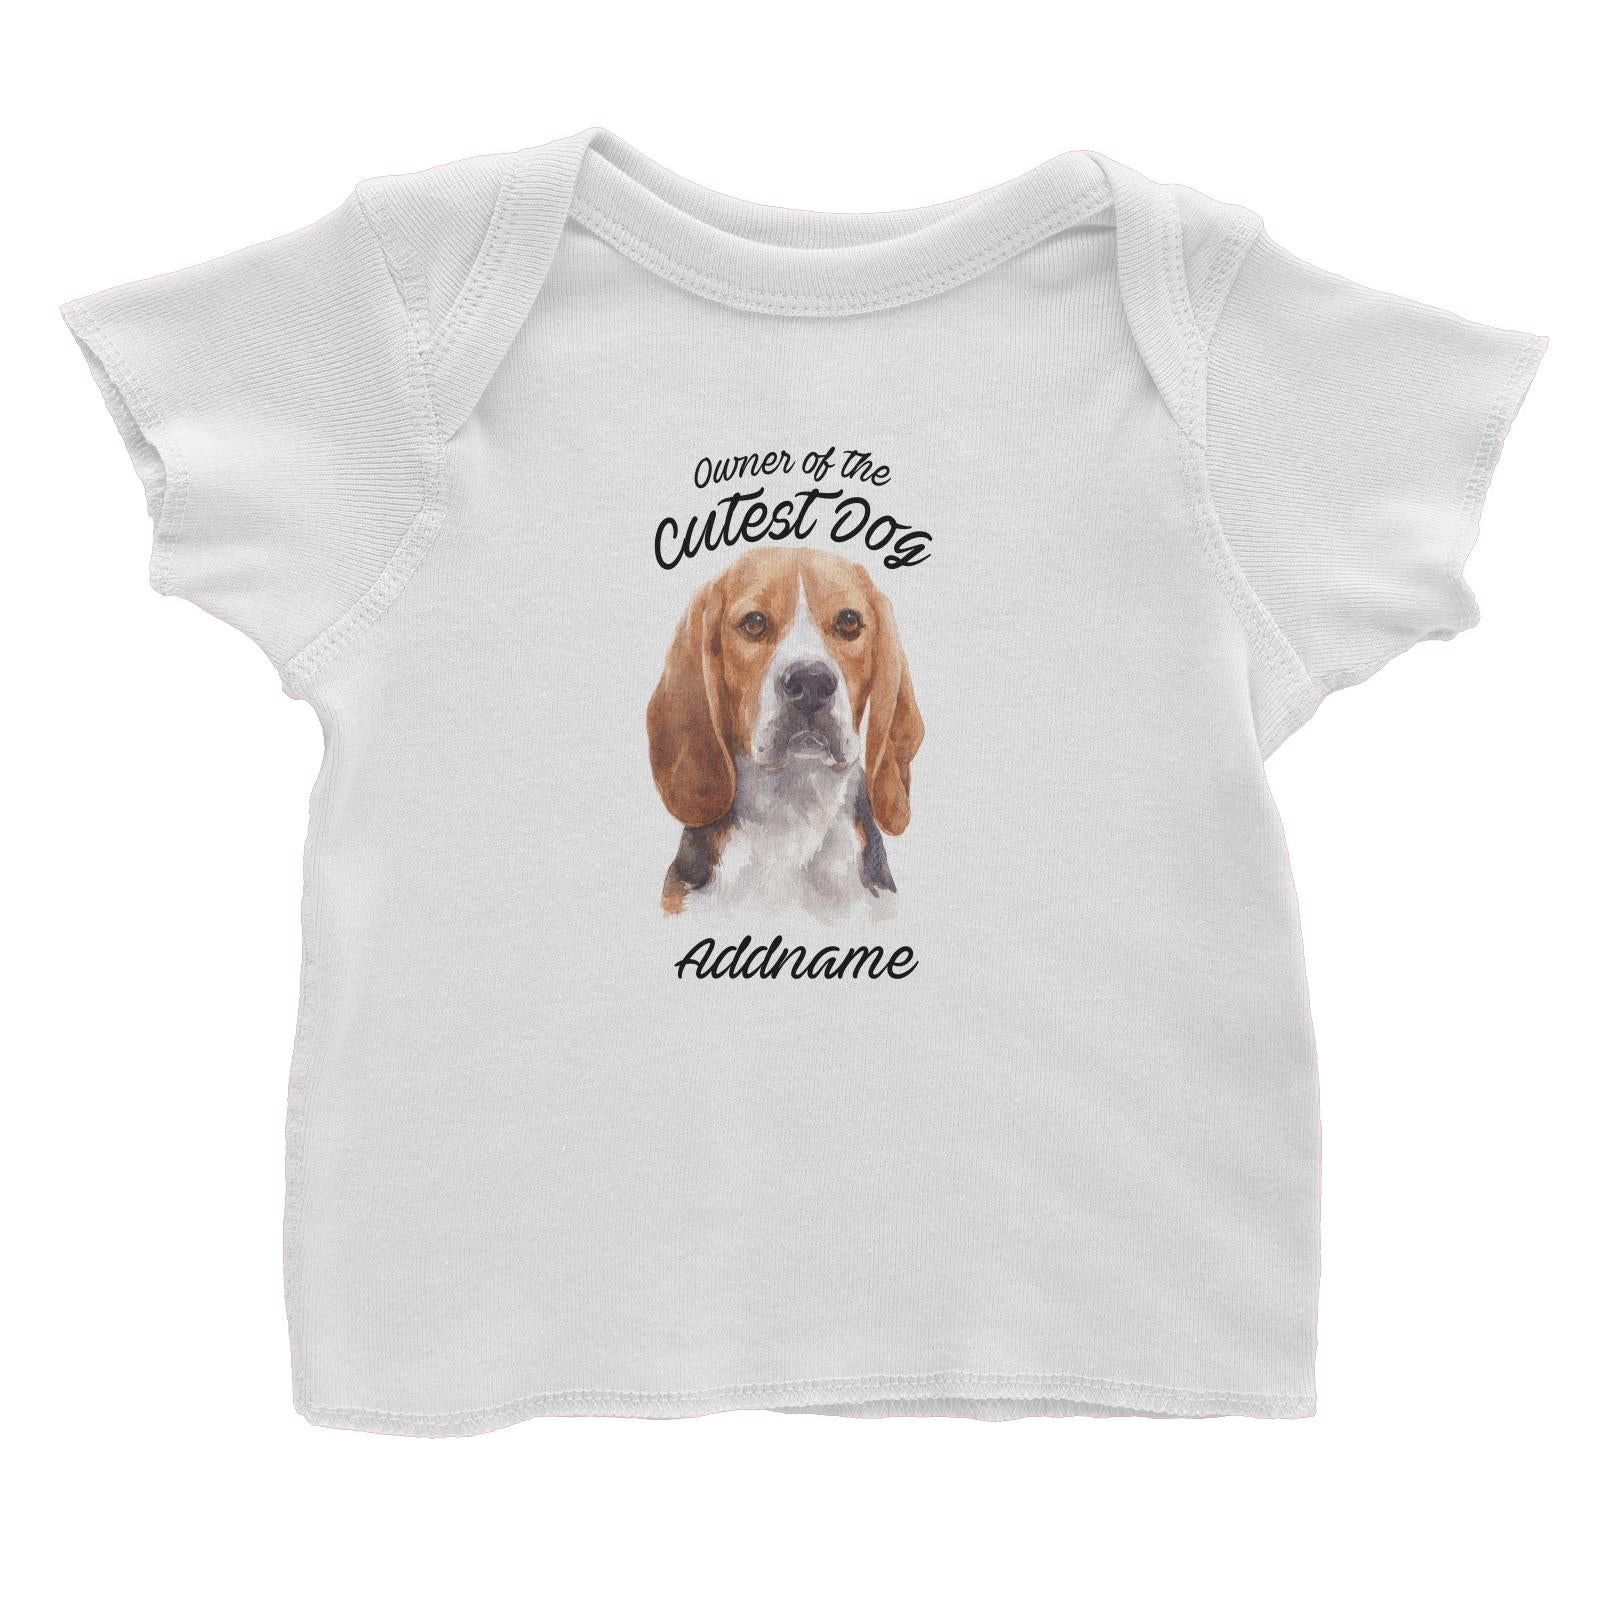 Watercolor Dog Owner Of The Dog Beagle Frown Addname Baby T-Shirt